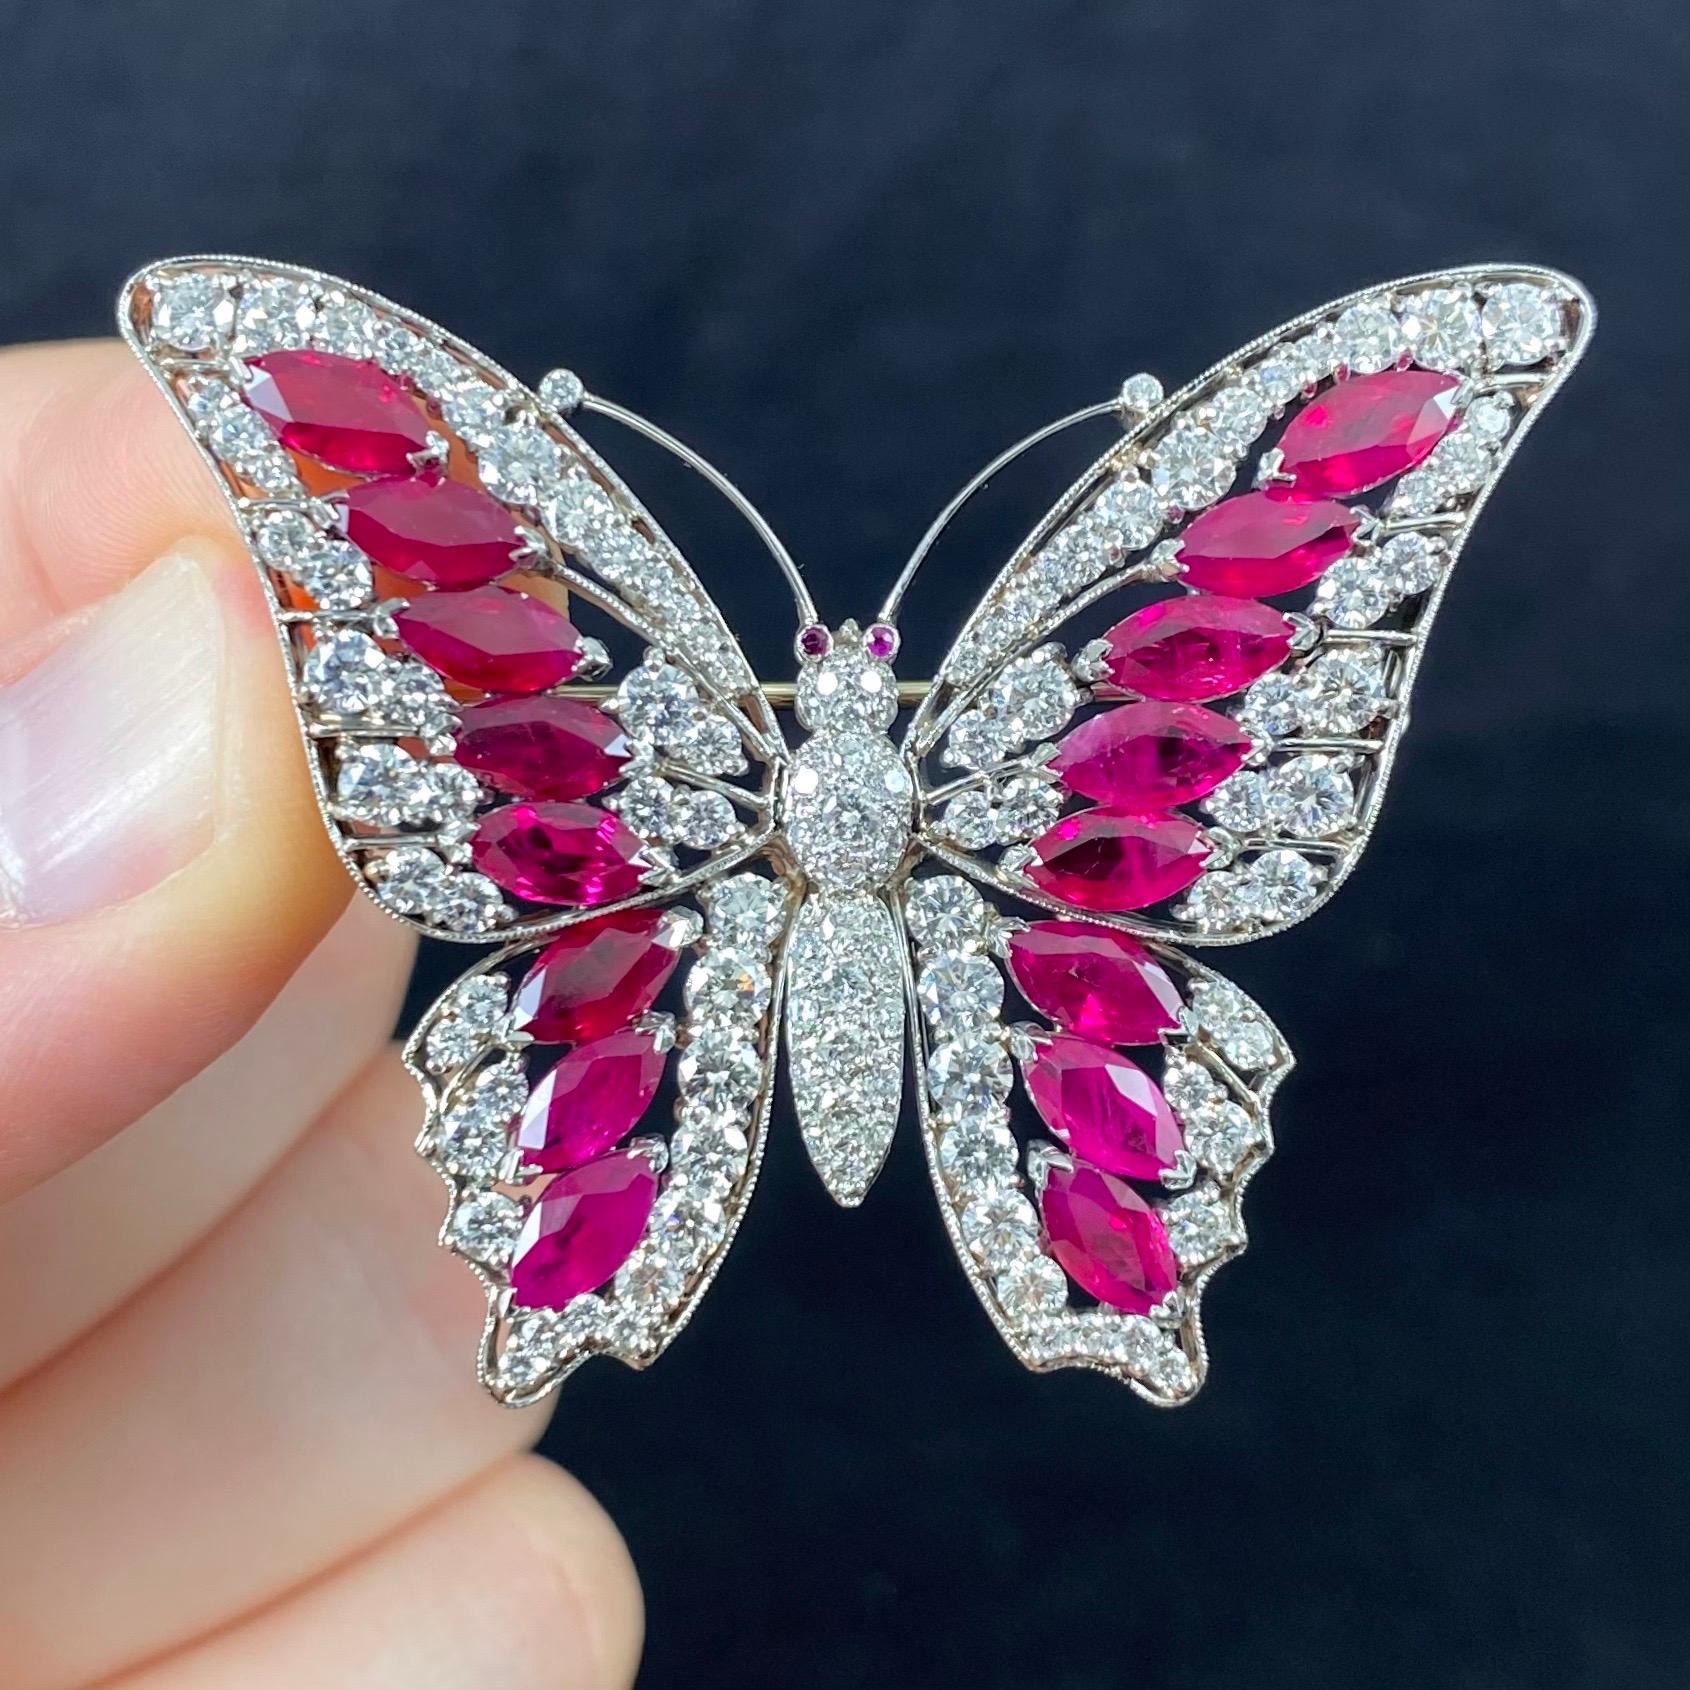 Vintage Ruby and Diamond Butterfly Brooch in Platinum and White Gold, 1990s. This brooch is modelled as a butterfly in flight, the winds decorated with marquise mixed-cut Burmese rubies and round brilliant-cut diamonds in an openwork design further